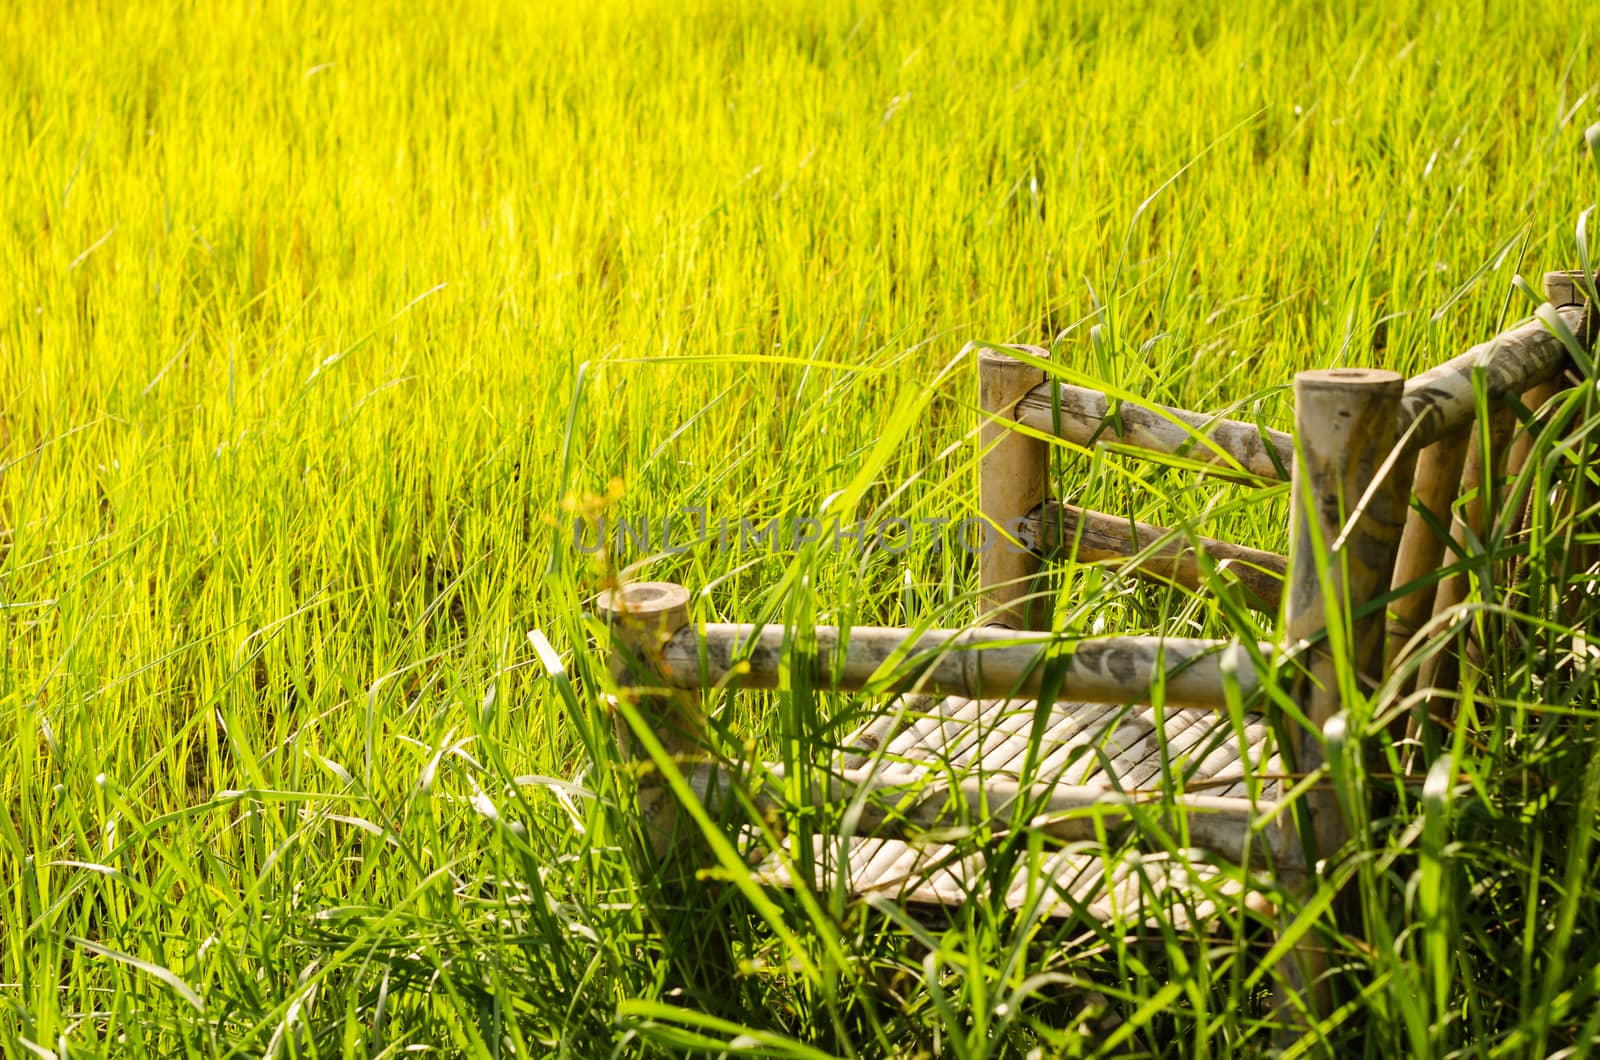 Bamboo wooden chairs on grass field in countryside Thailand